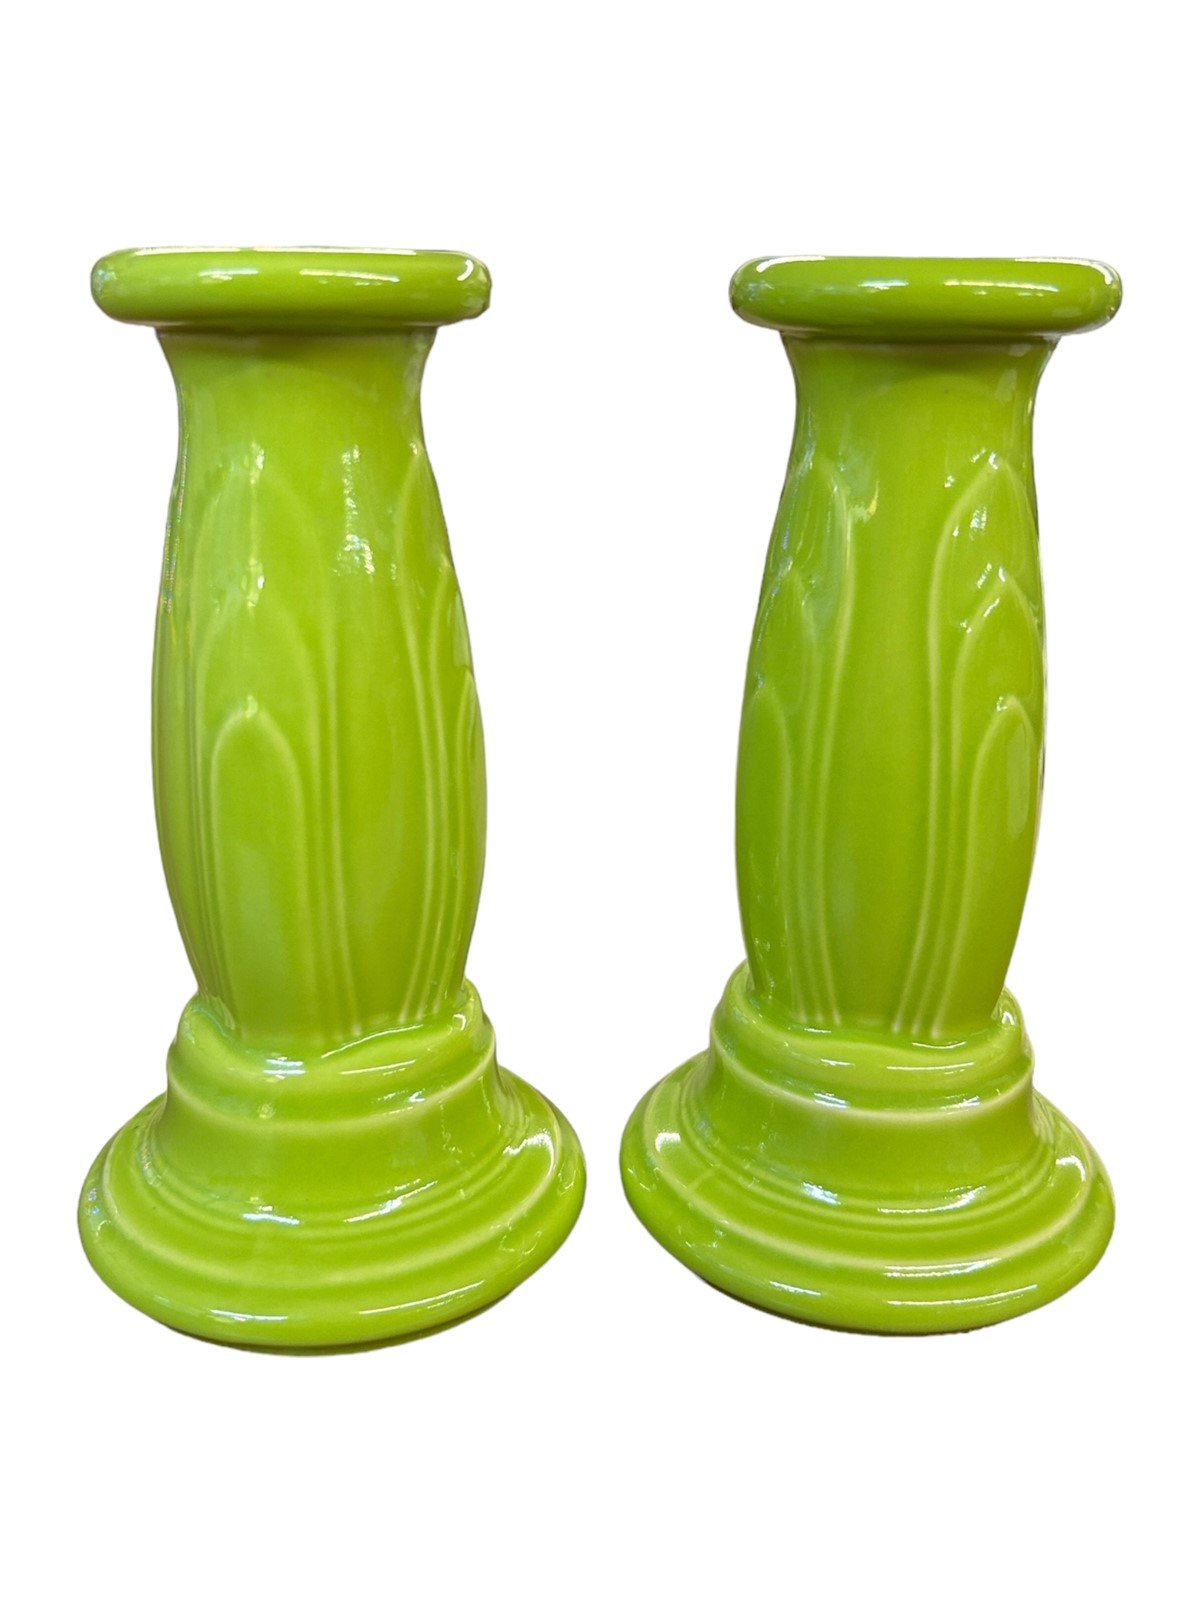 Tapered Candlestick Holders Chartreuse Fiesta Ware Homer Laughlin Ceramic Y2K